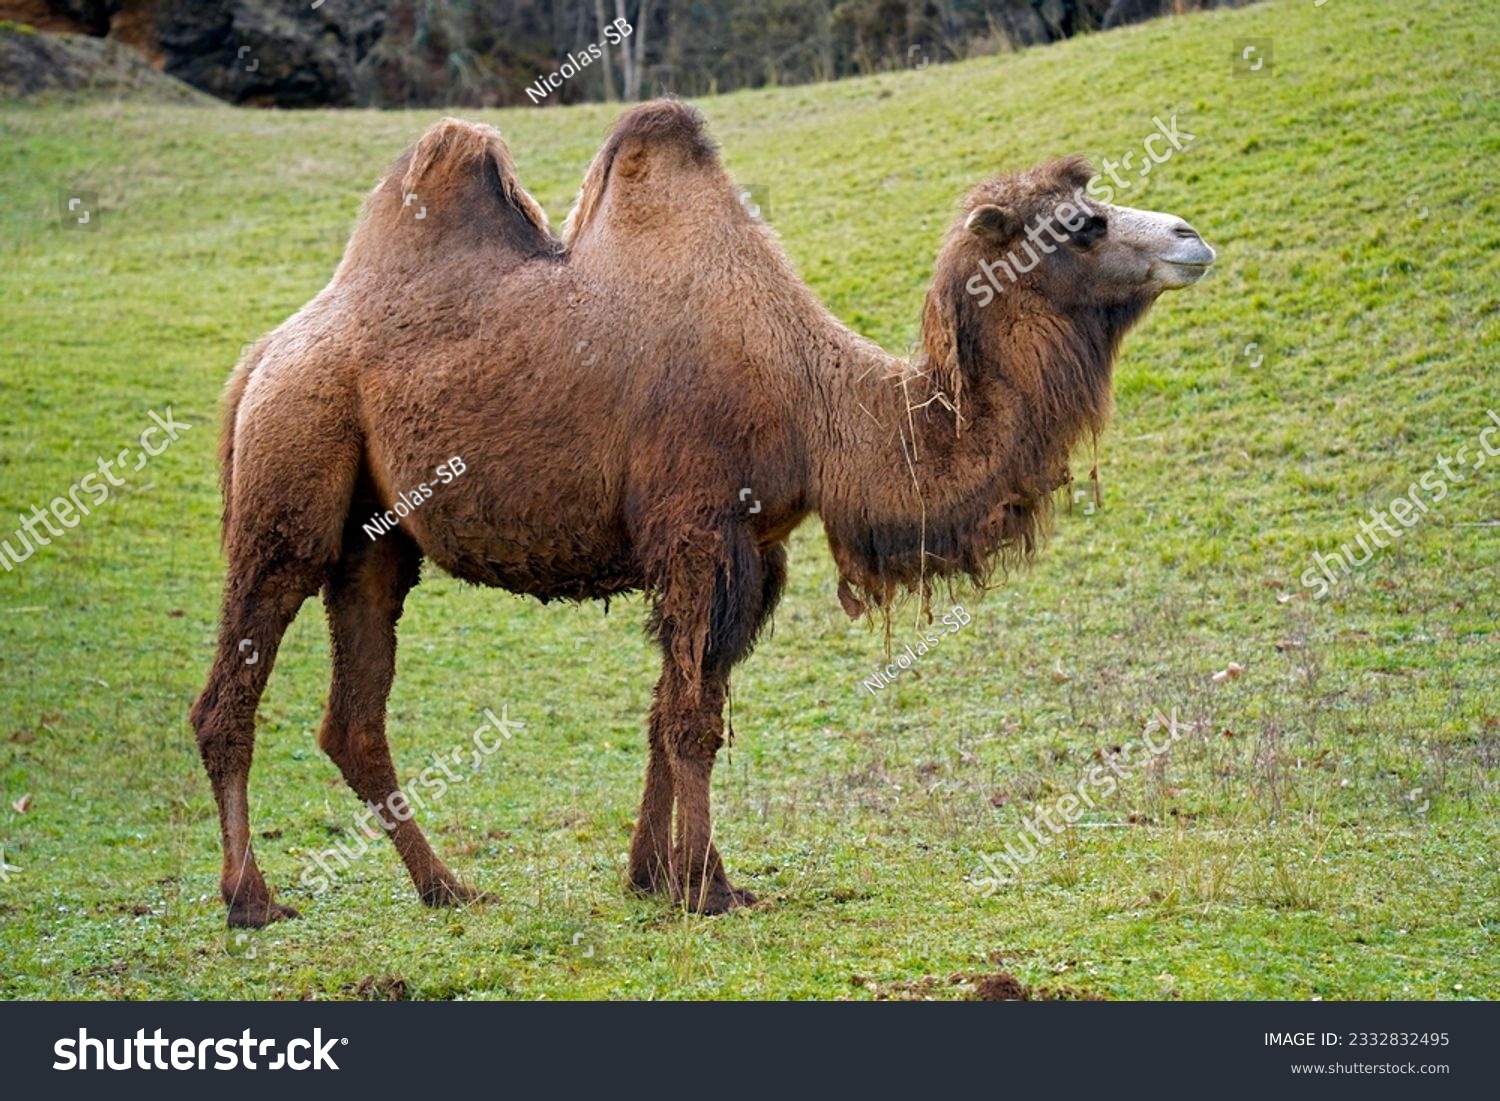 Portrait of a Bactrian camel (Camelus bactrianus) ina green background of weeds #2332832495